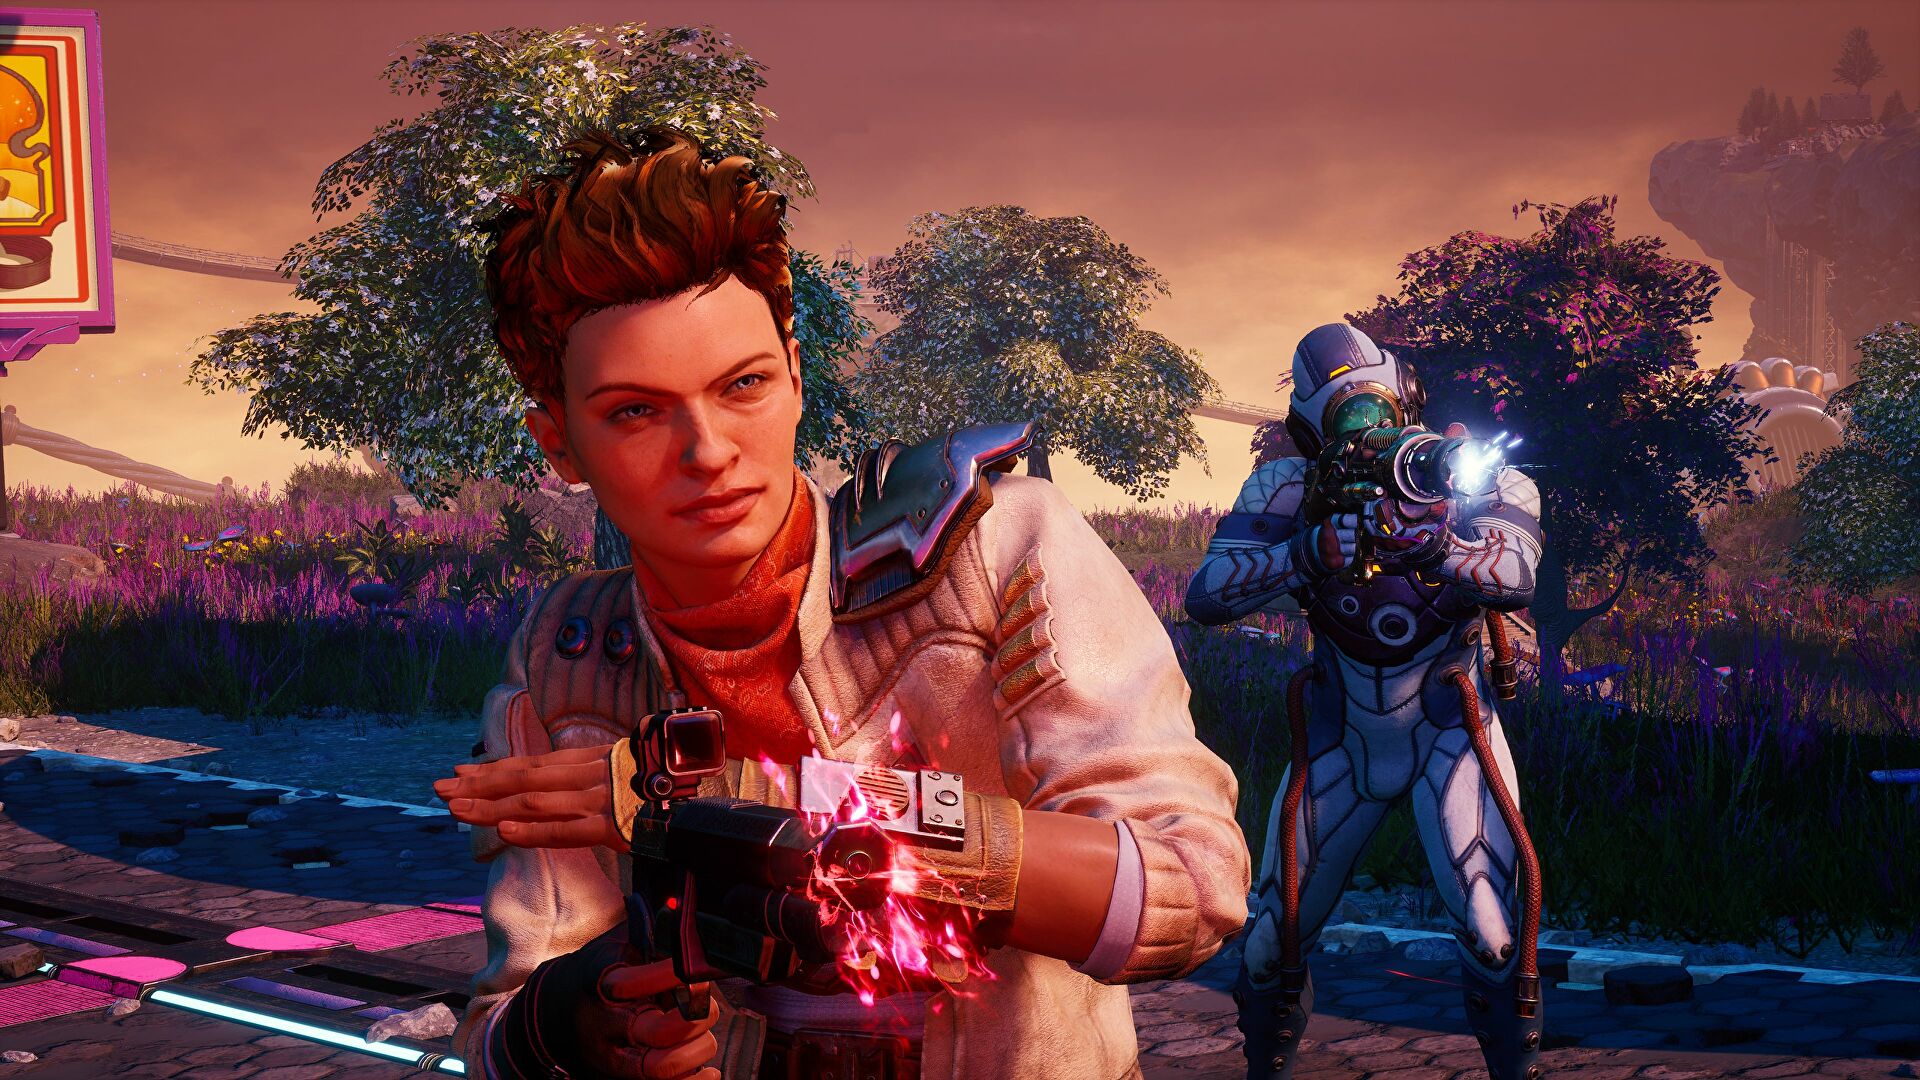 At Darren's World of Entertainment: The Outer Worlds: Spacer's Choice  Edition: PS5 Review